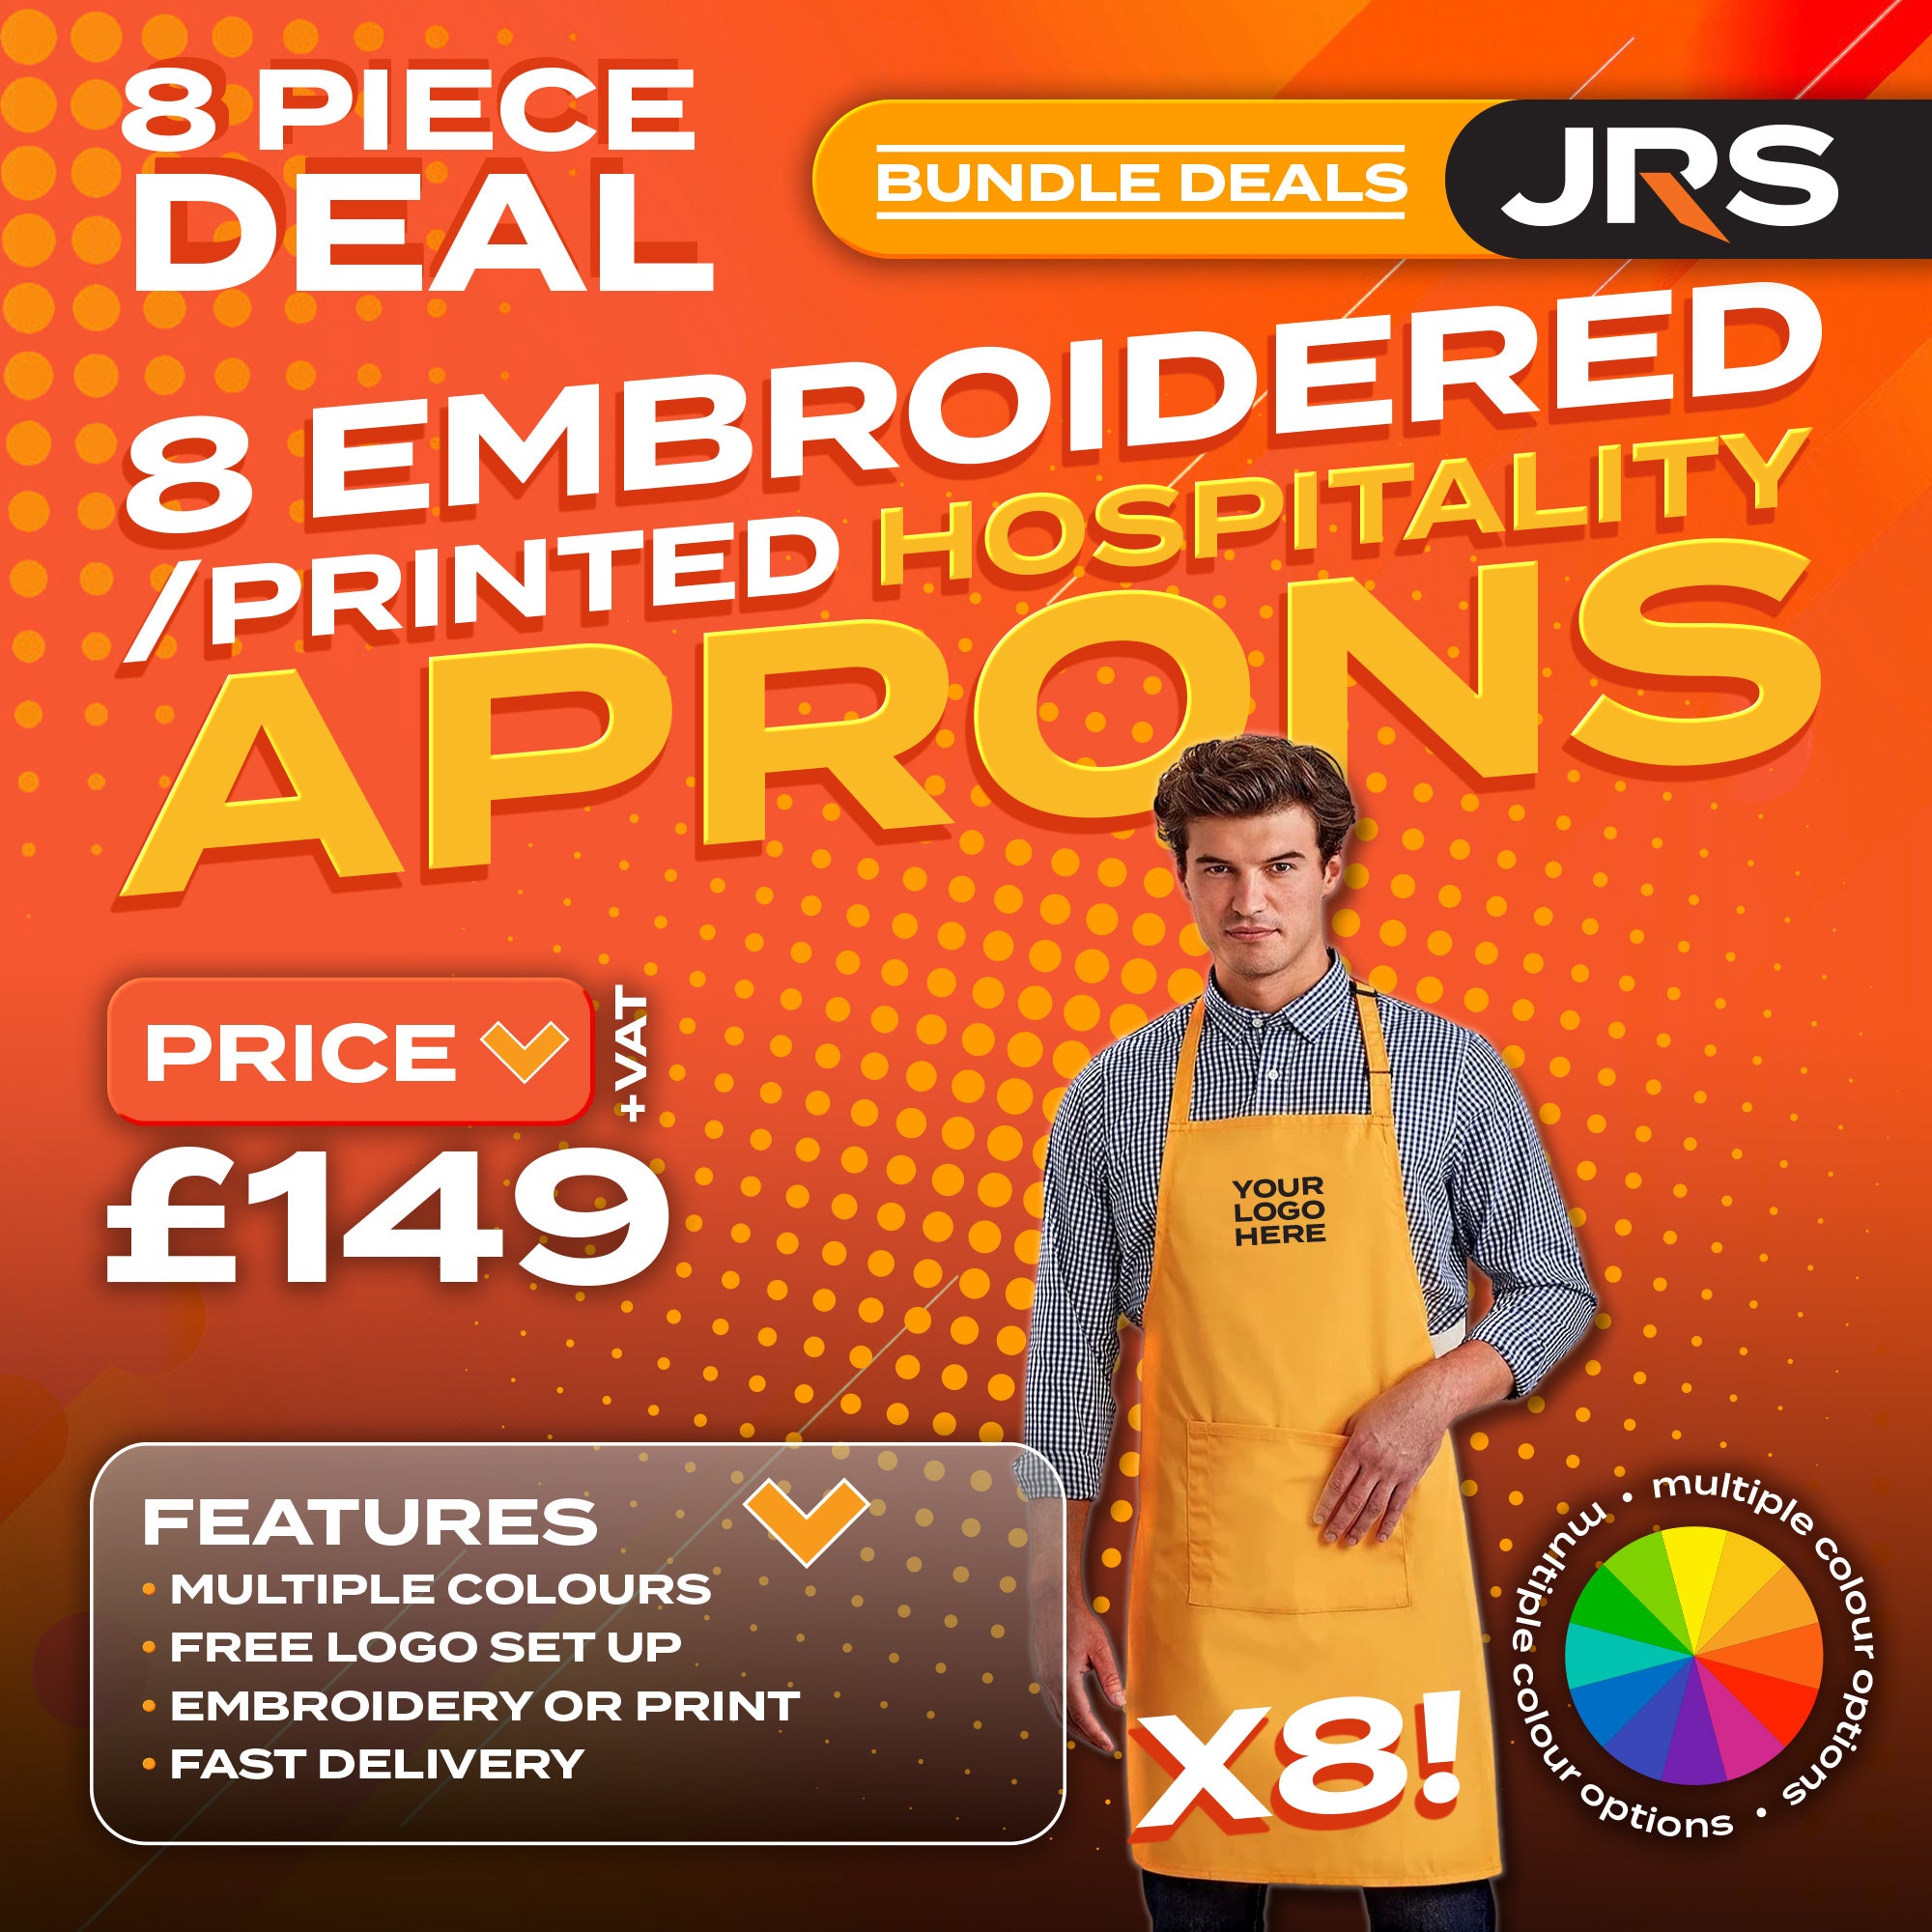 8x Embroidered/Printed Pocket Aprons - PR154